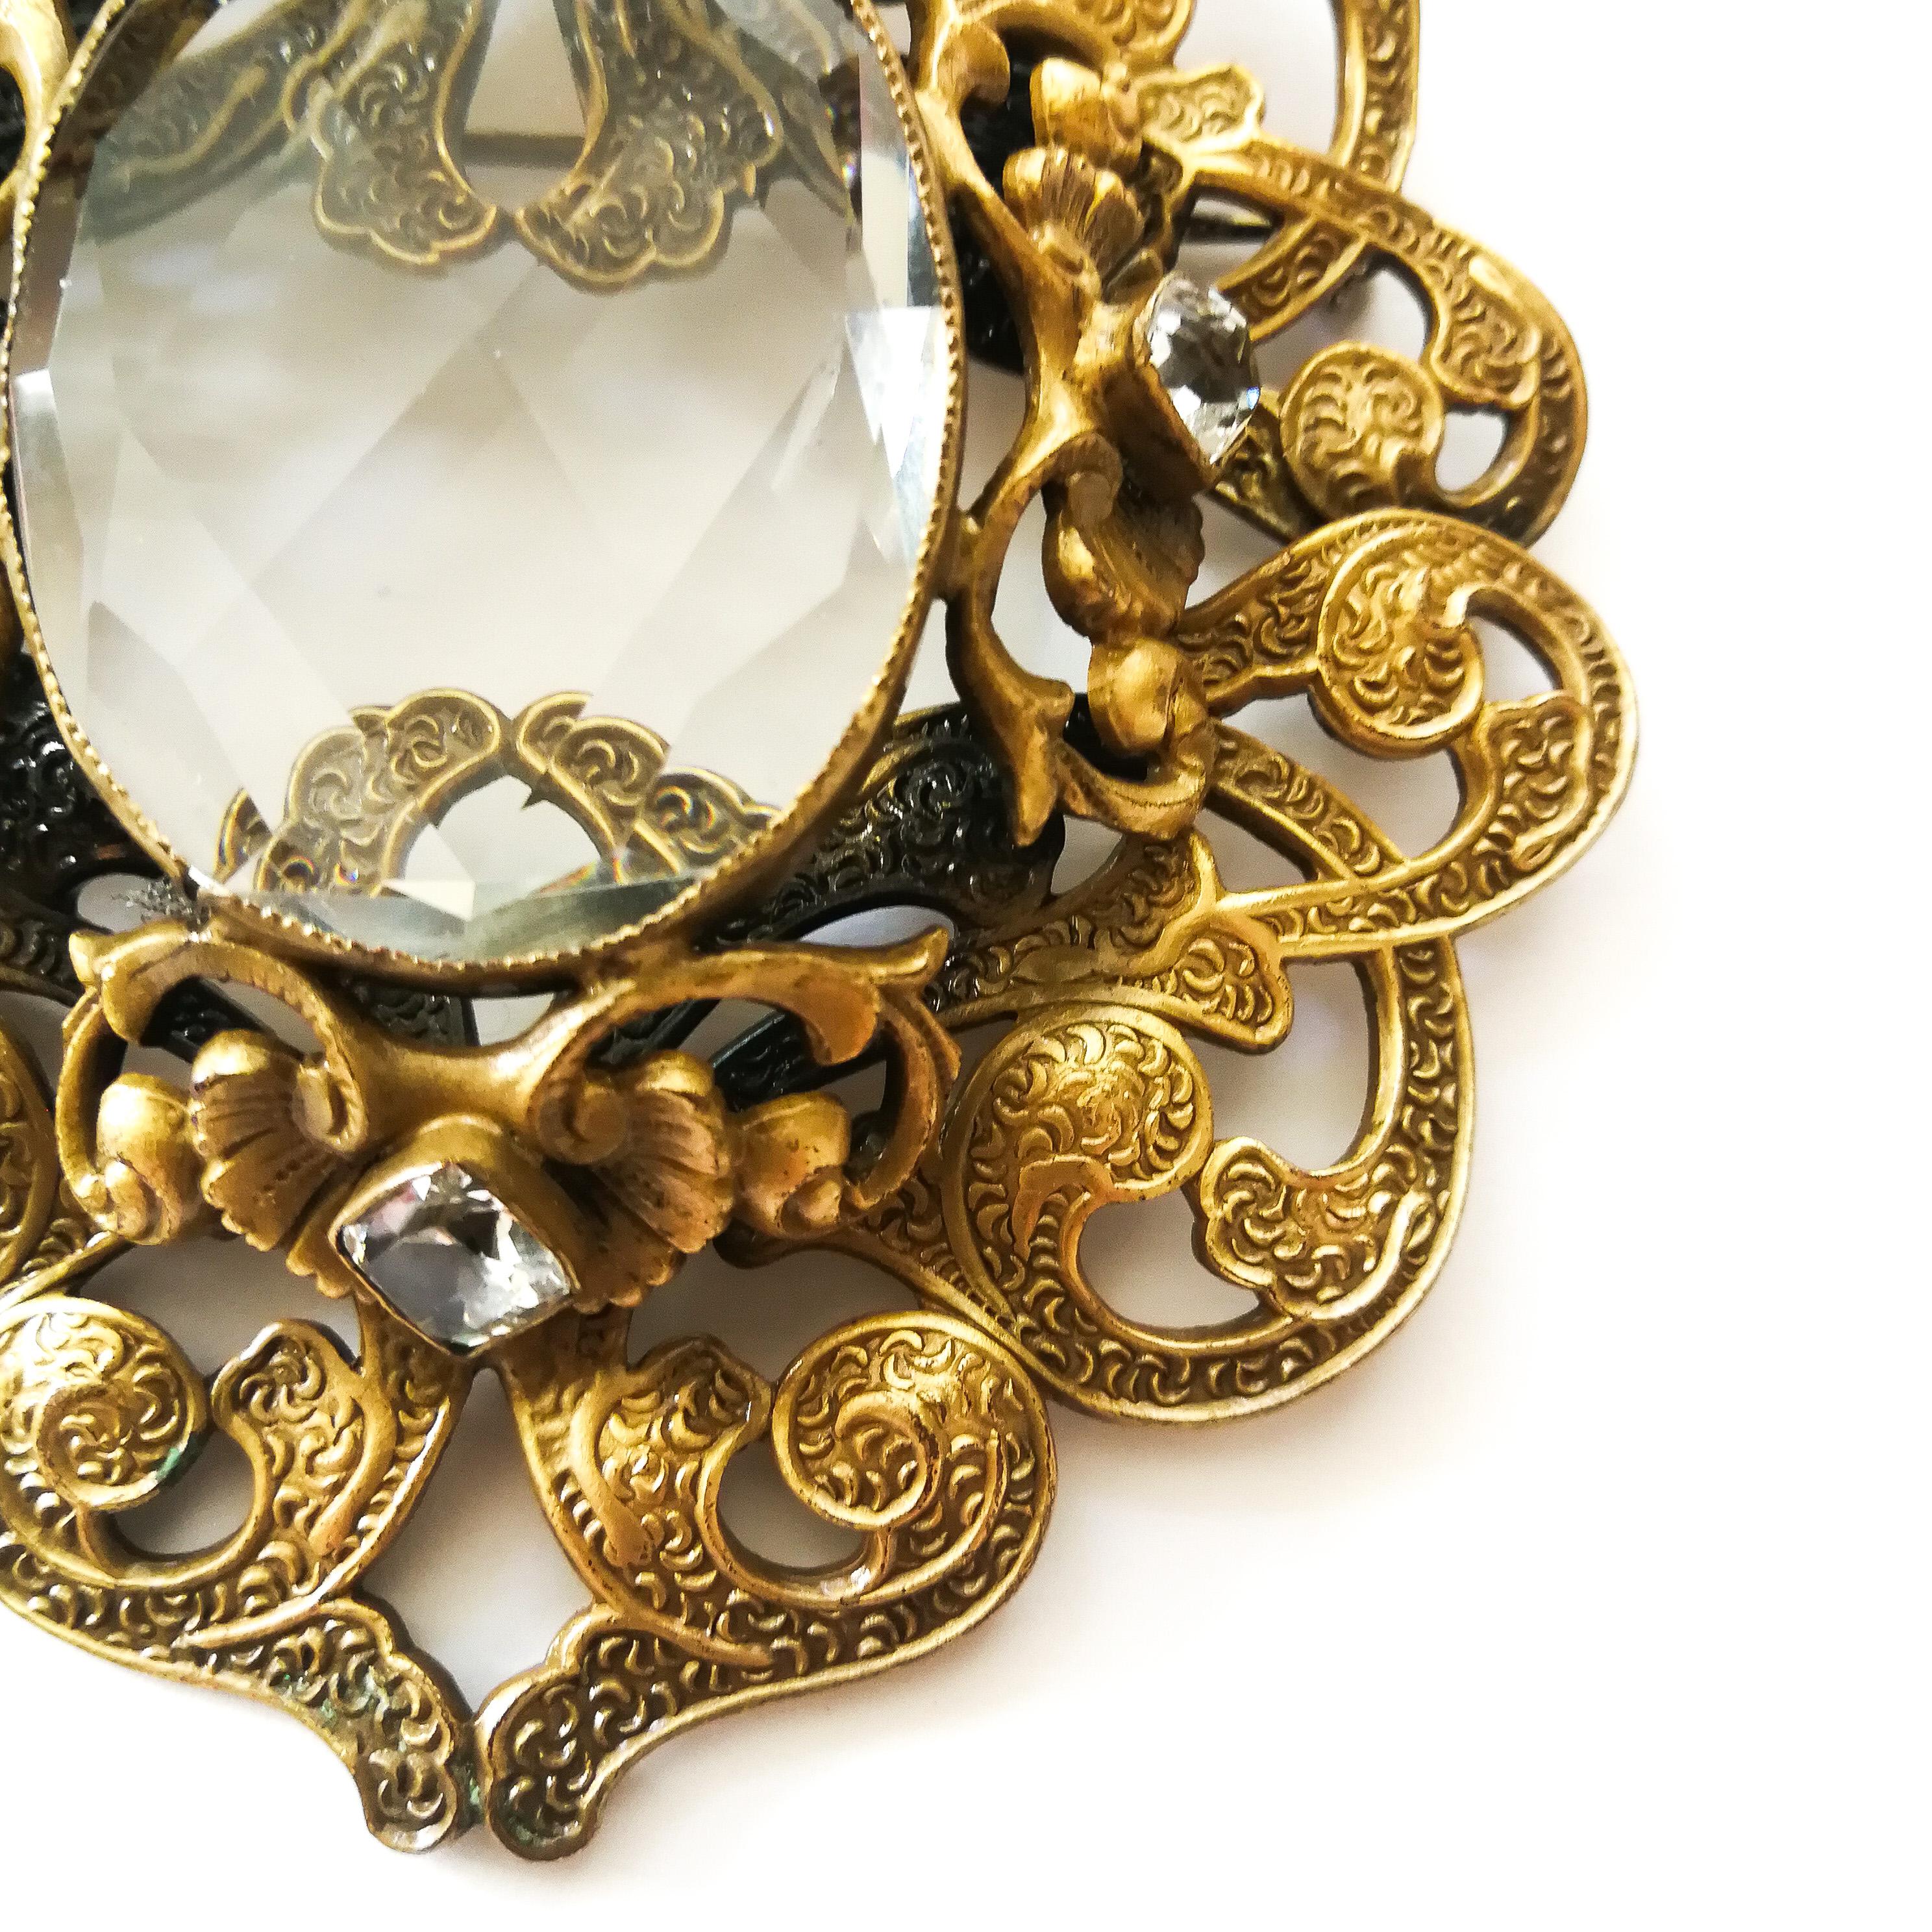 A large gilt metal Baroque brooch with large central stone, Joseff Of Hollywood. 1